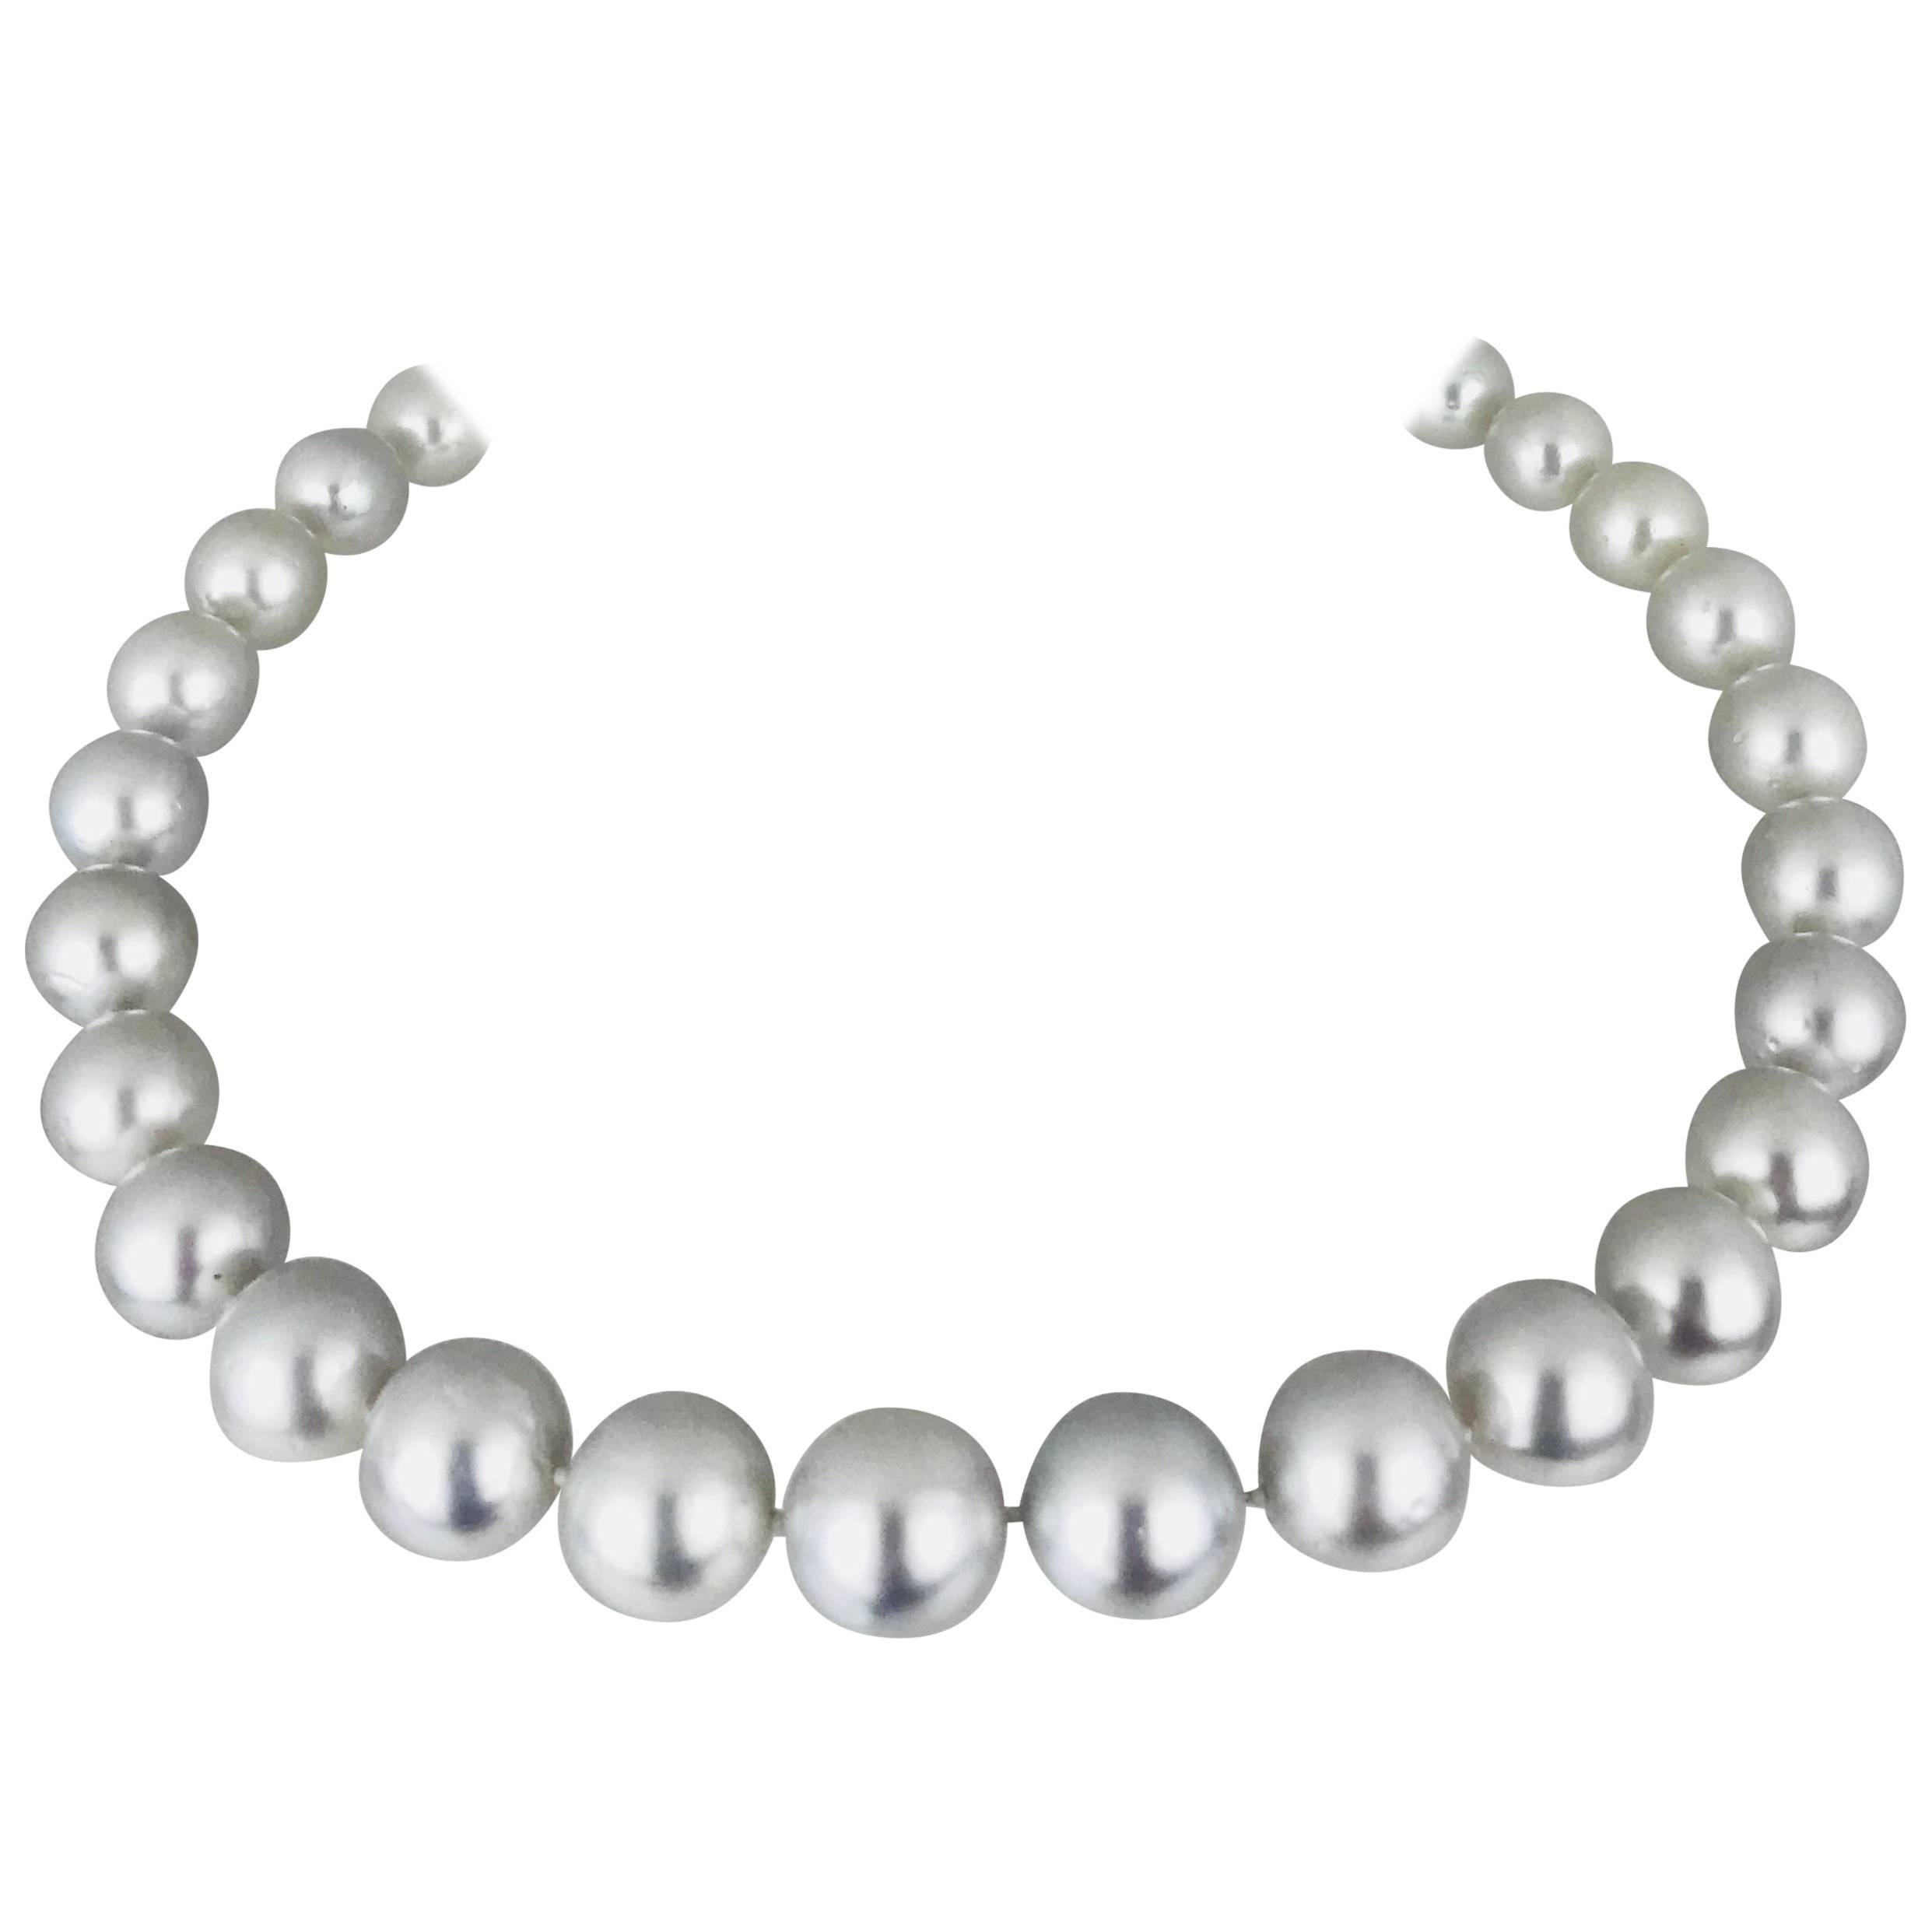 White South Sea Pearl Strand, Silver-White, Contemporary Large 12.12 - 14.40 mm For Sale